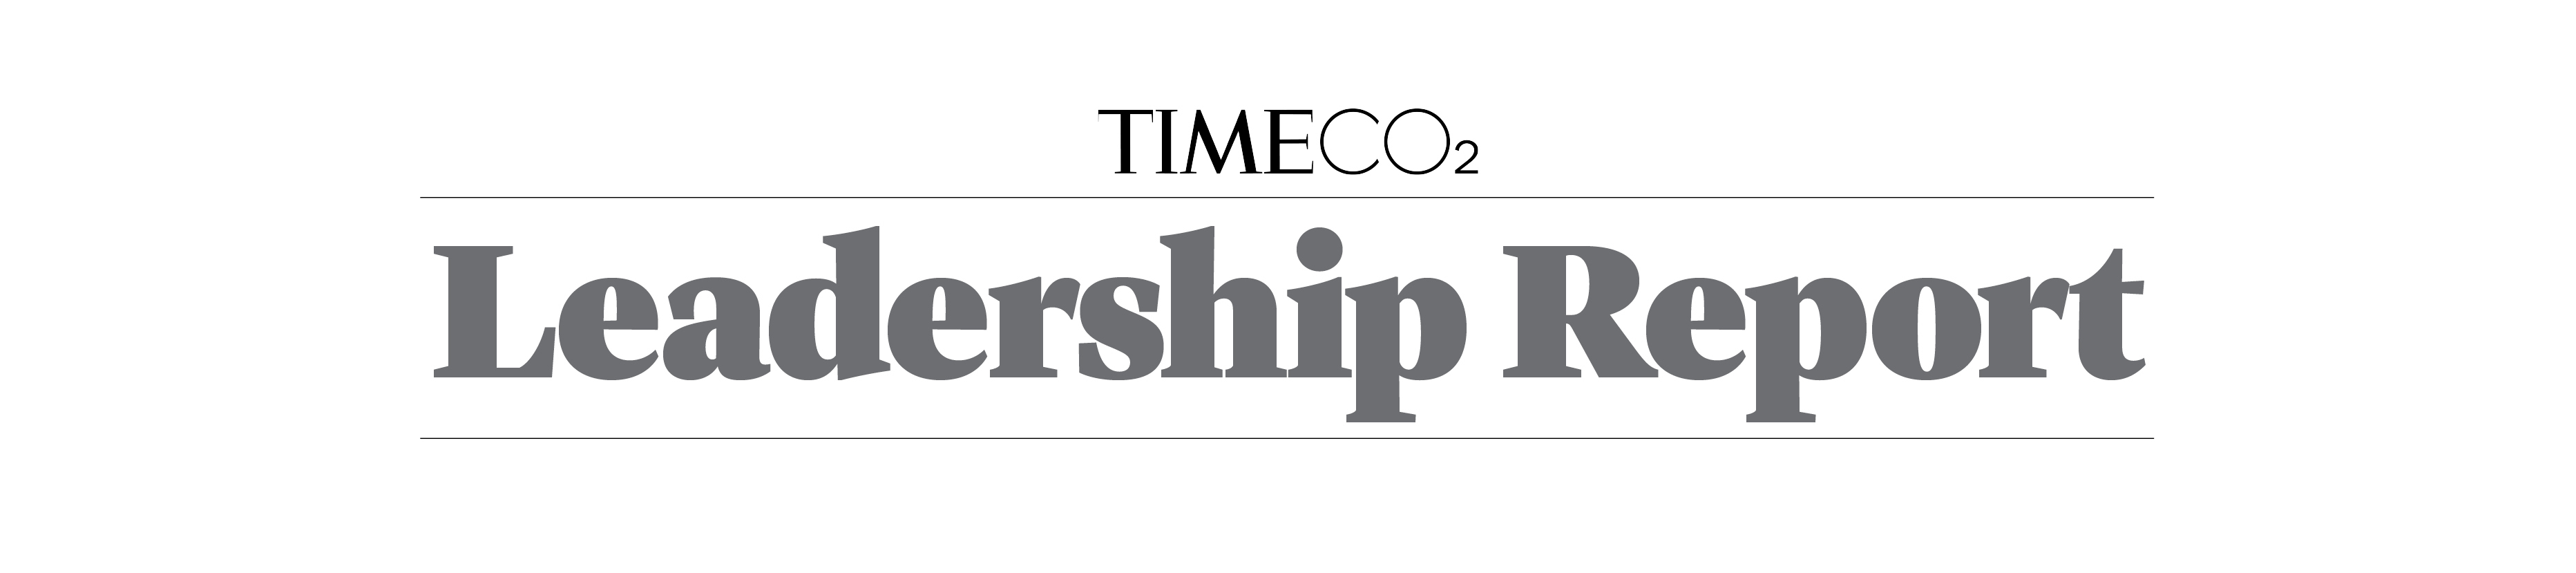 TIME CO2 Leadership Report